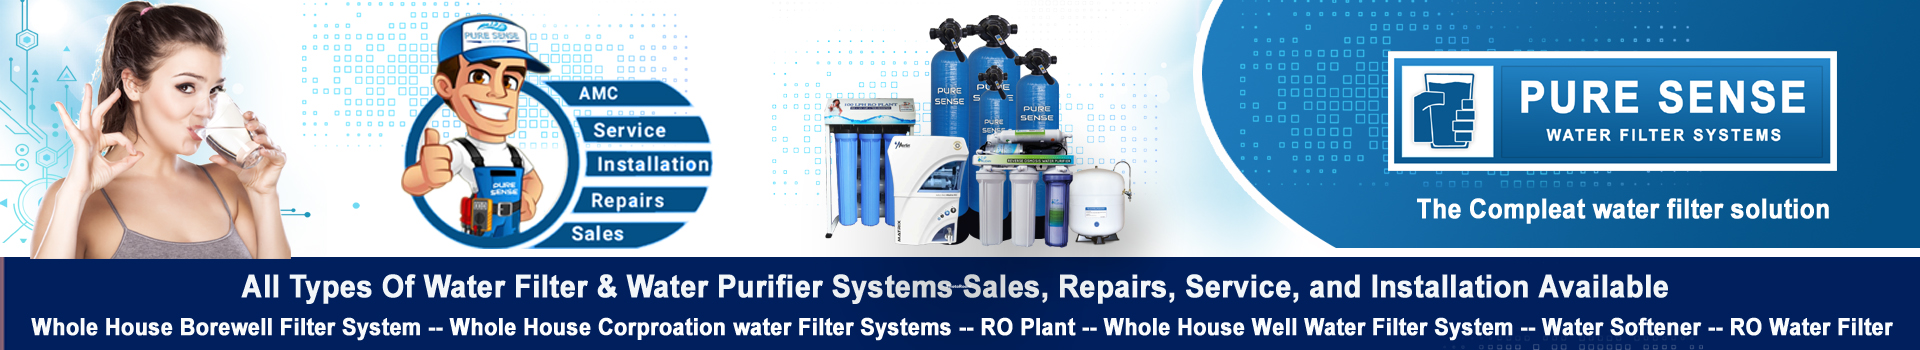 Water-Filter-Repair-and-Service-Contact-Number-Thrissur-Water-Filter-Repair-Service-Thrissur-Contact-Number-Water-Purification-System